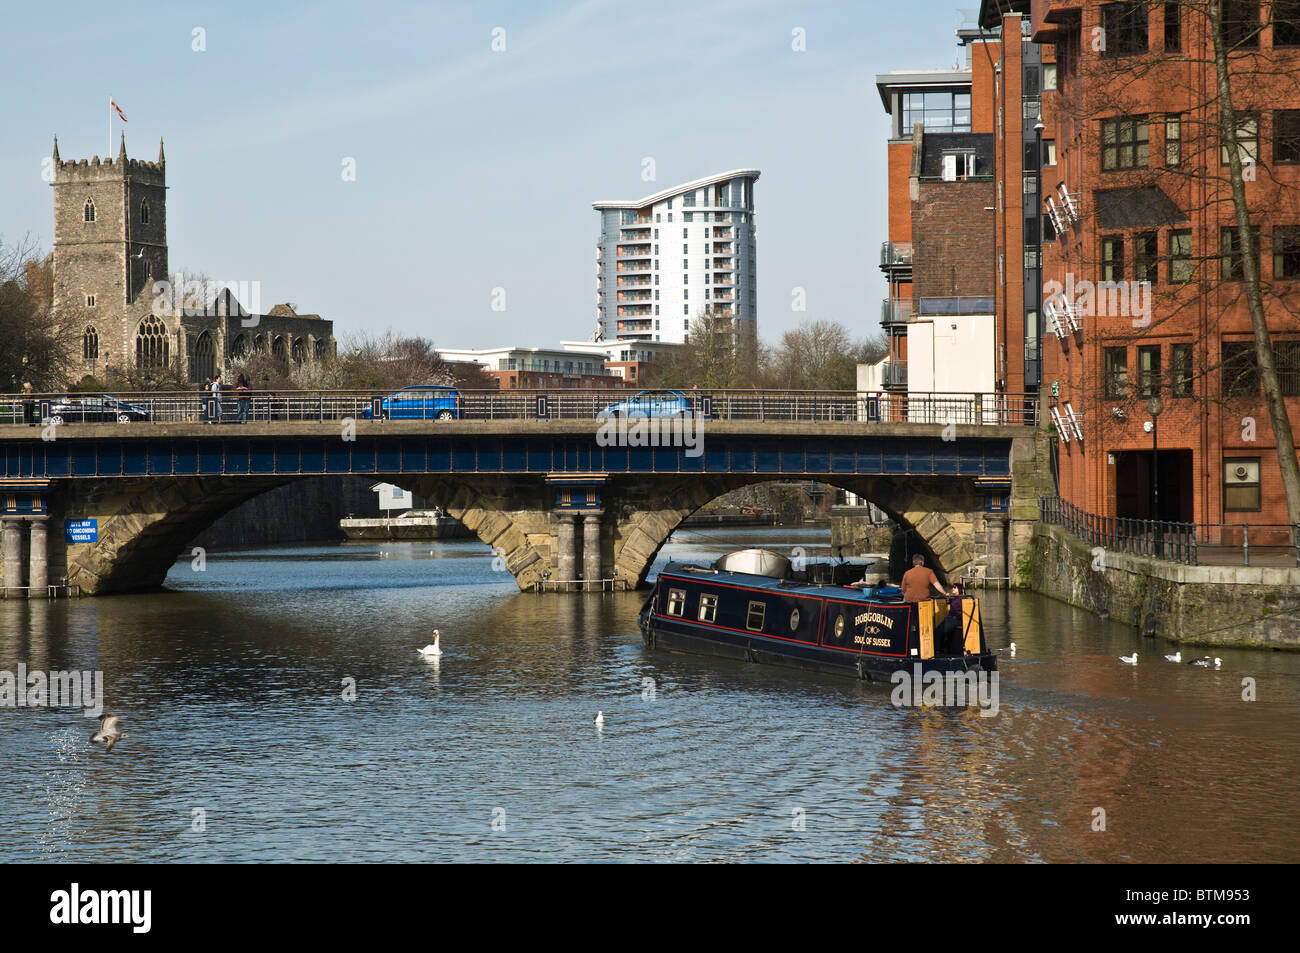 dh Floating Harbour CITY BRISTOL Narrowboat barge bridge waterfront canal boat England river canals uk Stock Photo